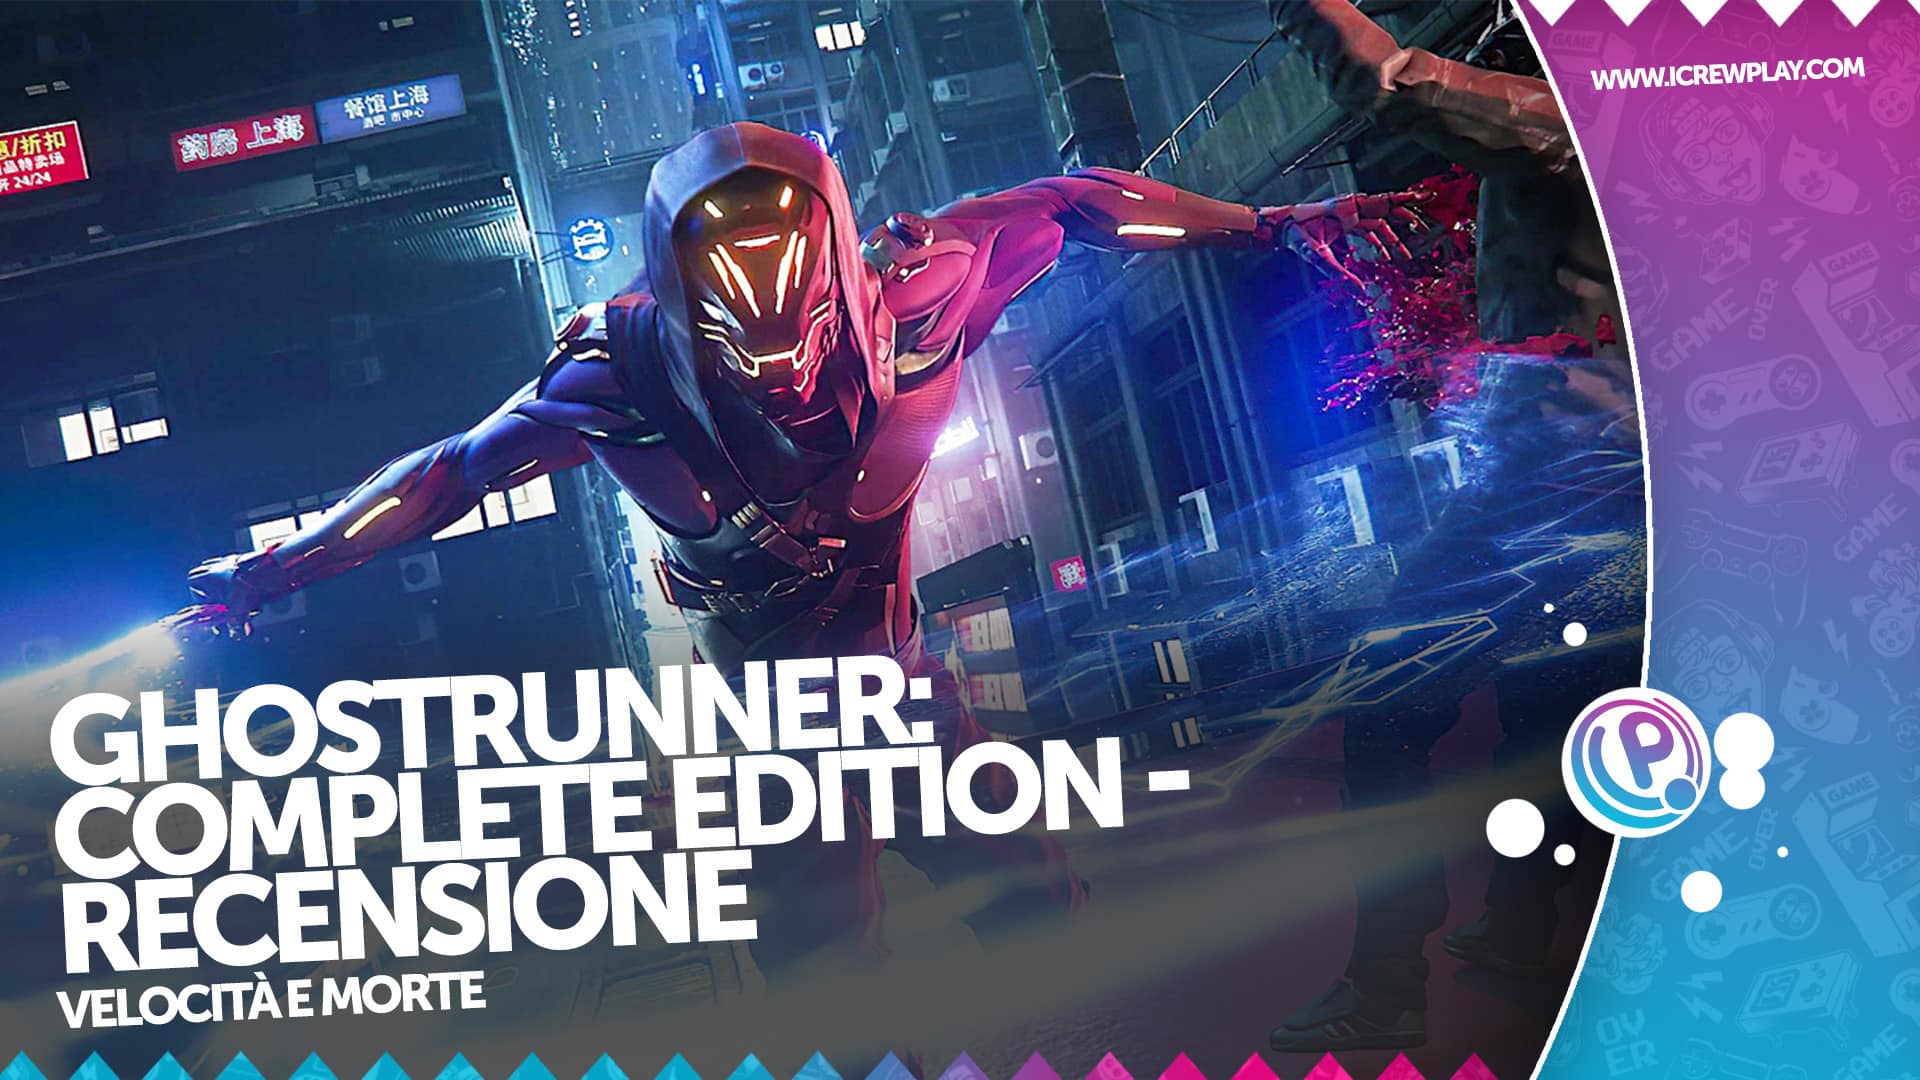 Ghostrunner: Complete Edition - Recensione per PlayStation 5 8